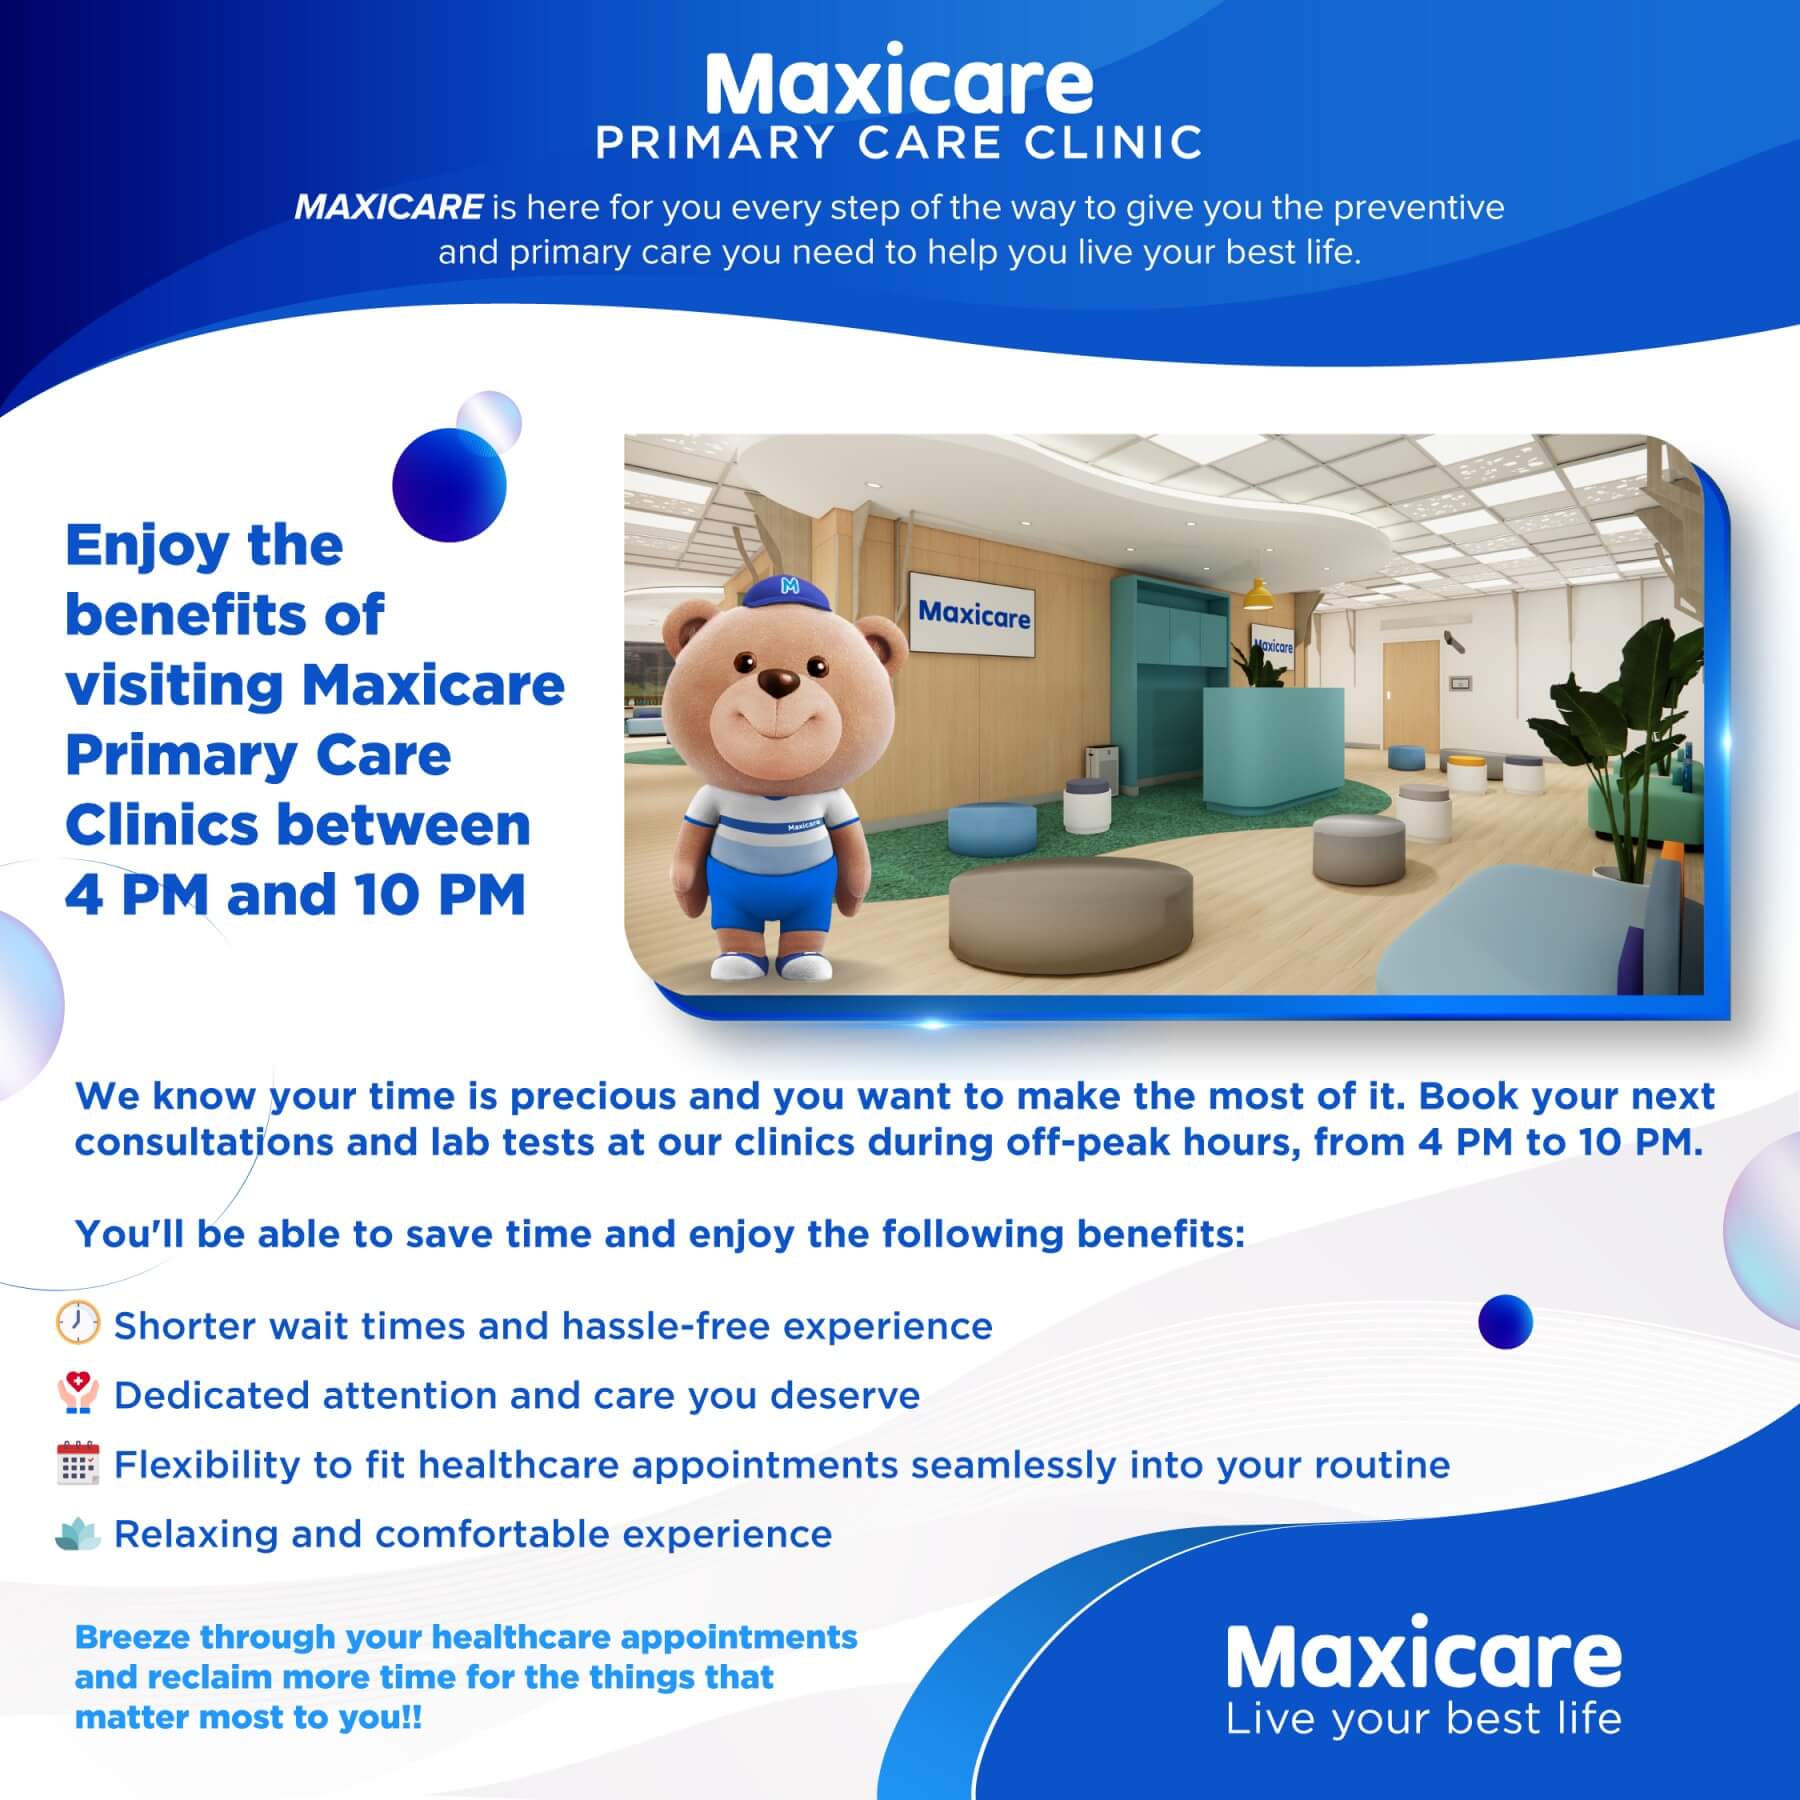 Maxicare - Book during off-peak hours